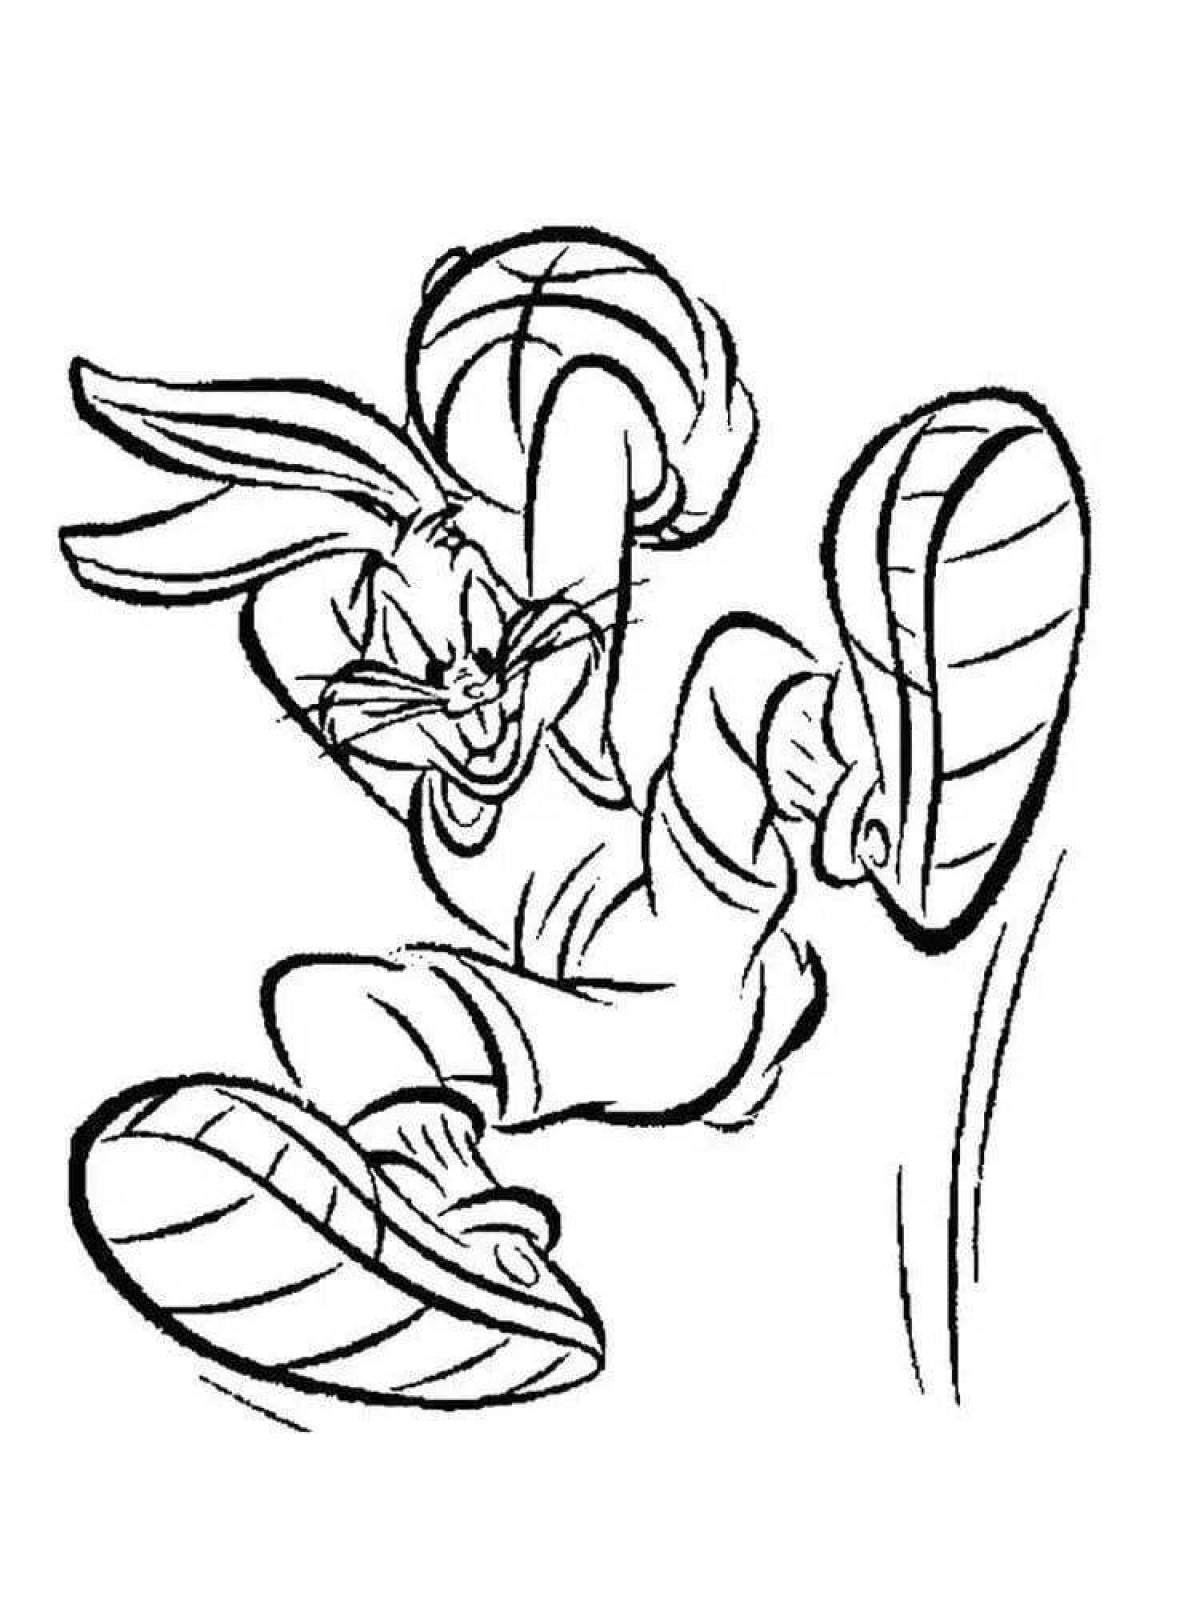 Amazing Bugs Bunny Coloring Page